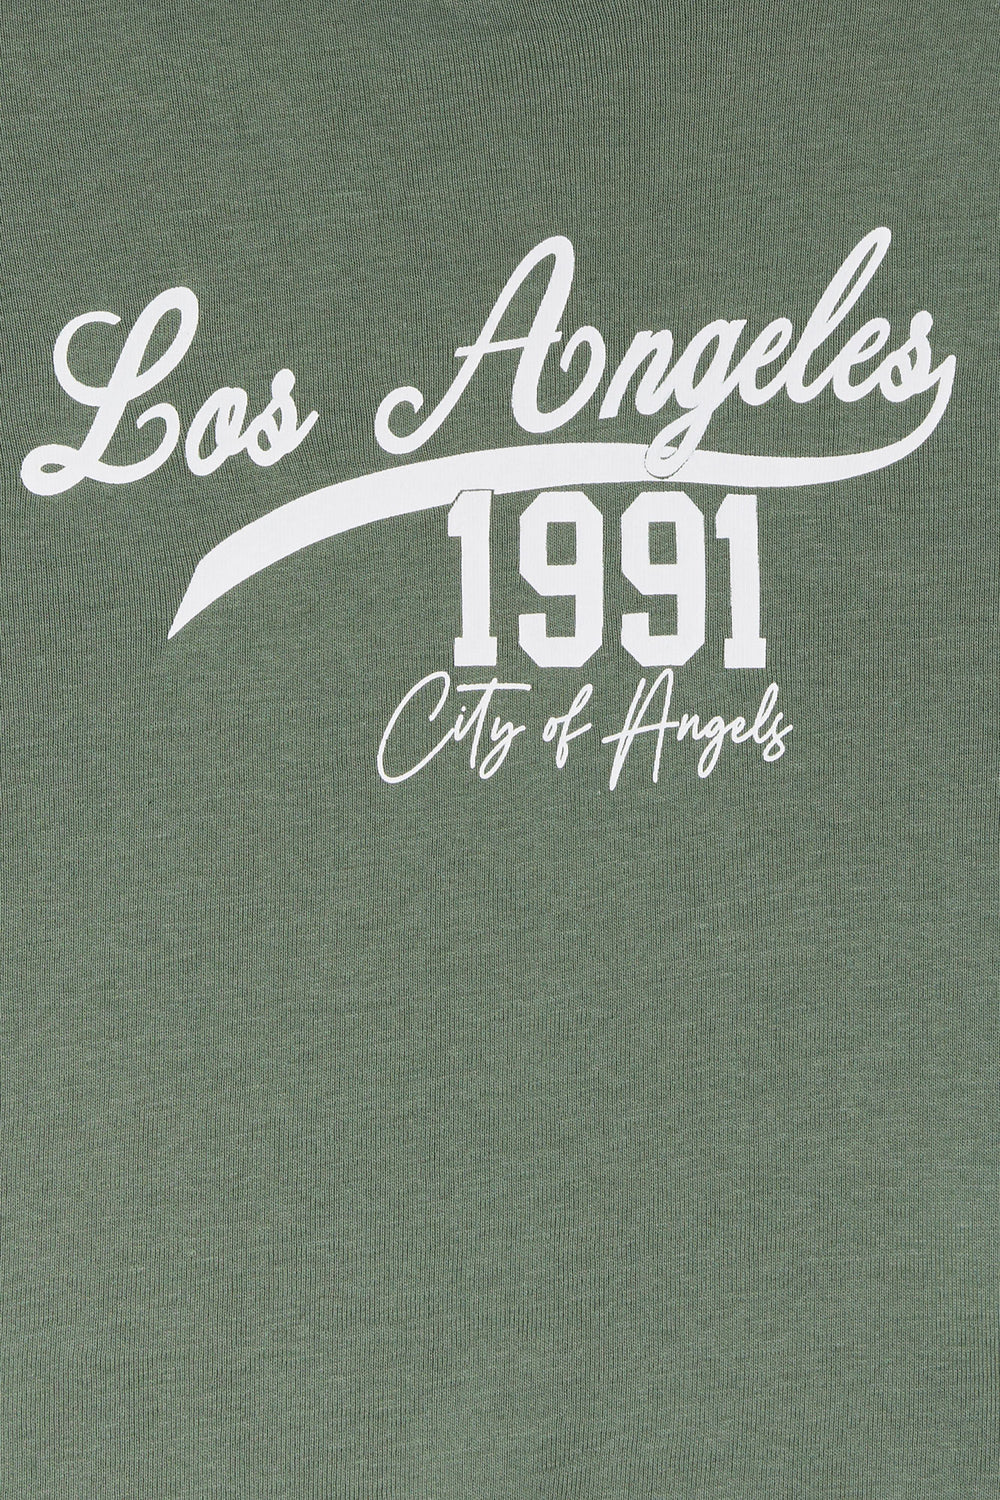 Los Angeles Graphic Baby Ringer T-Shirt Los Angeles Graphic Baby Ringer T-Shirt 1